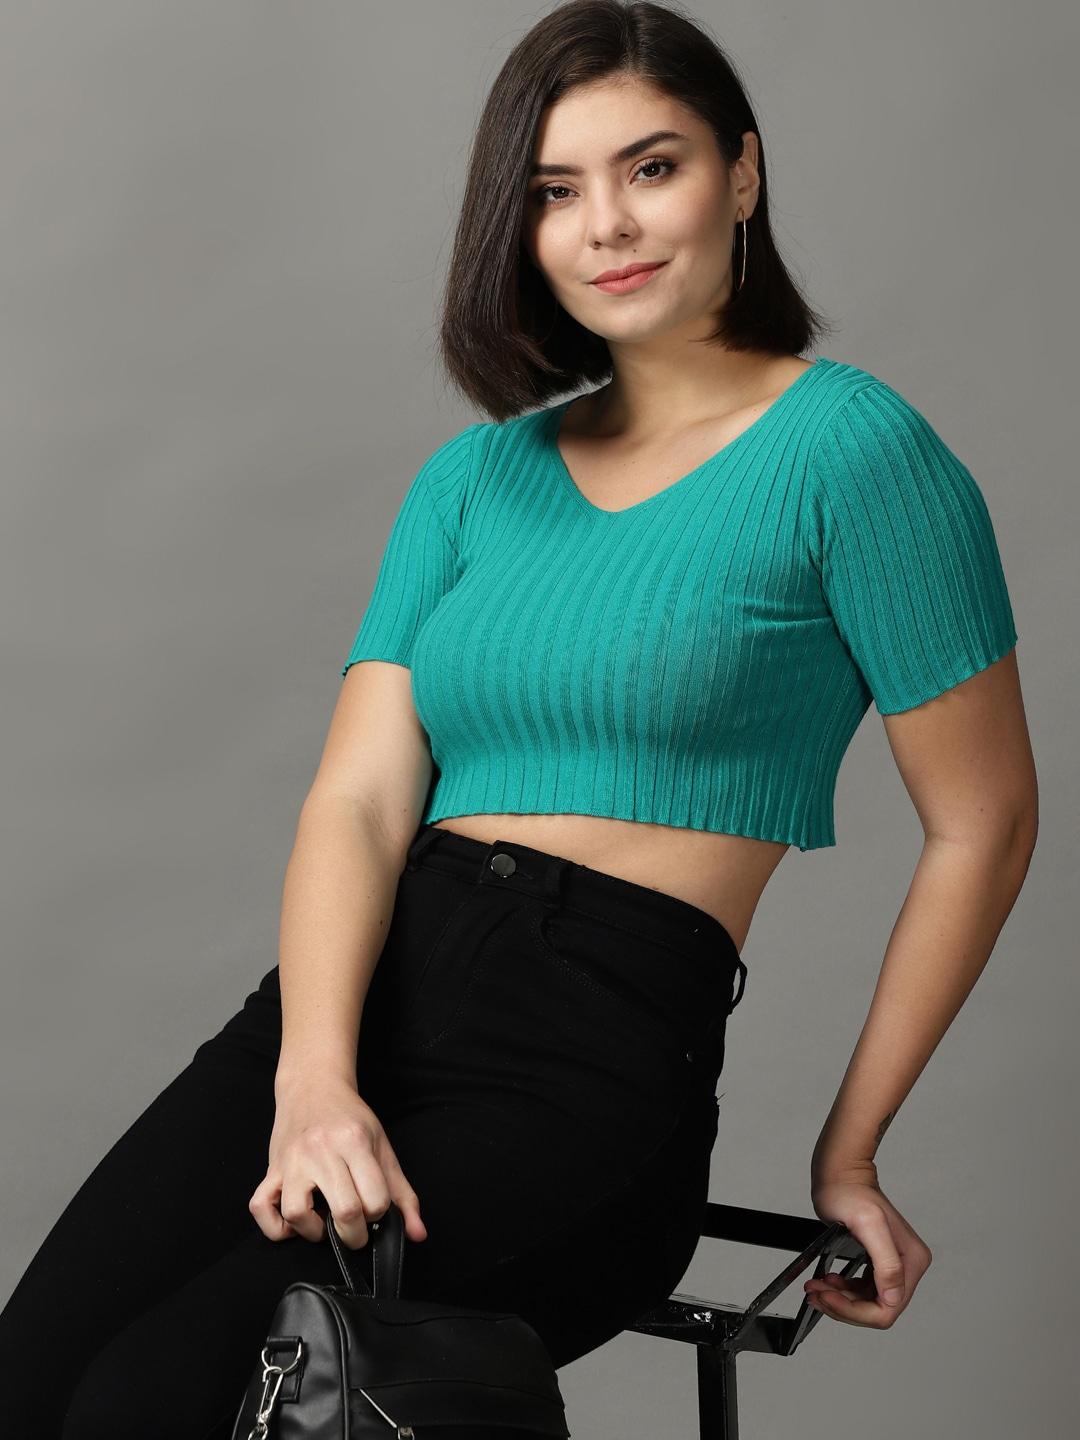 SHOWOFF Teal Green V-Neck Fitted Acrylic Crop Top